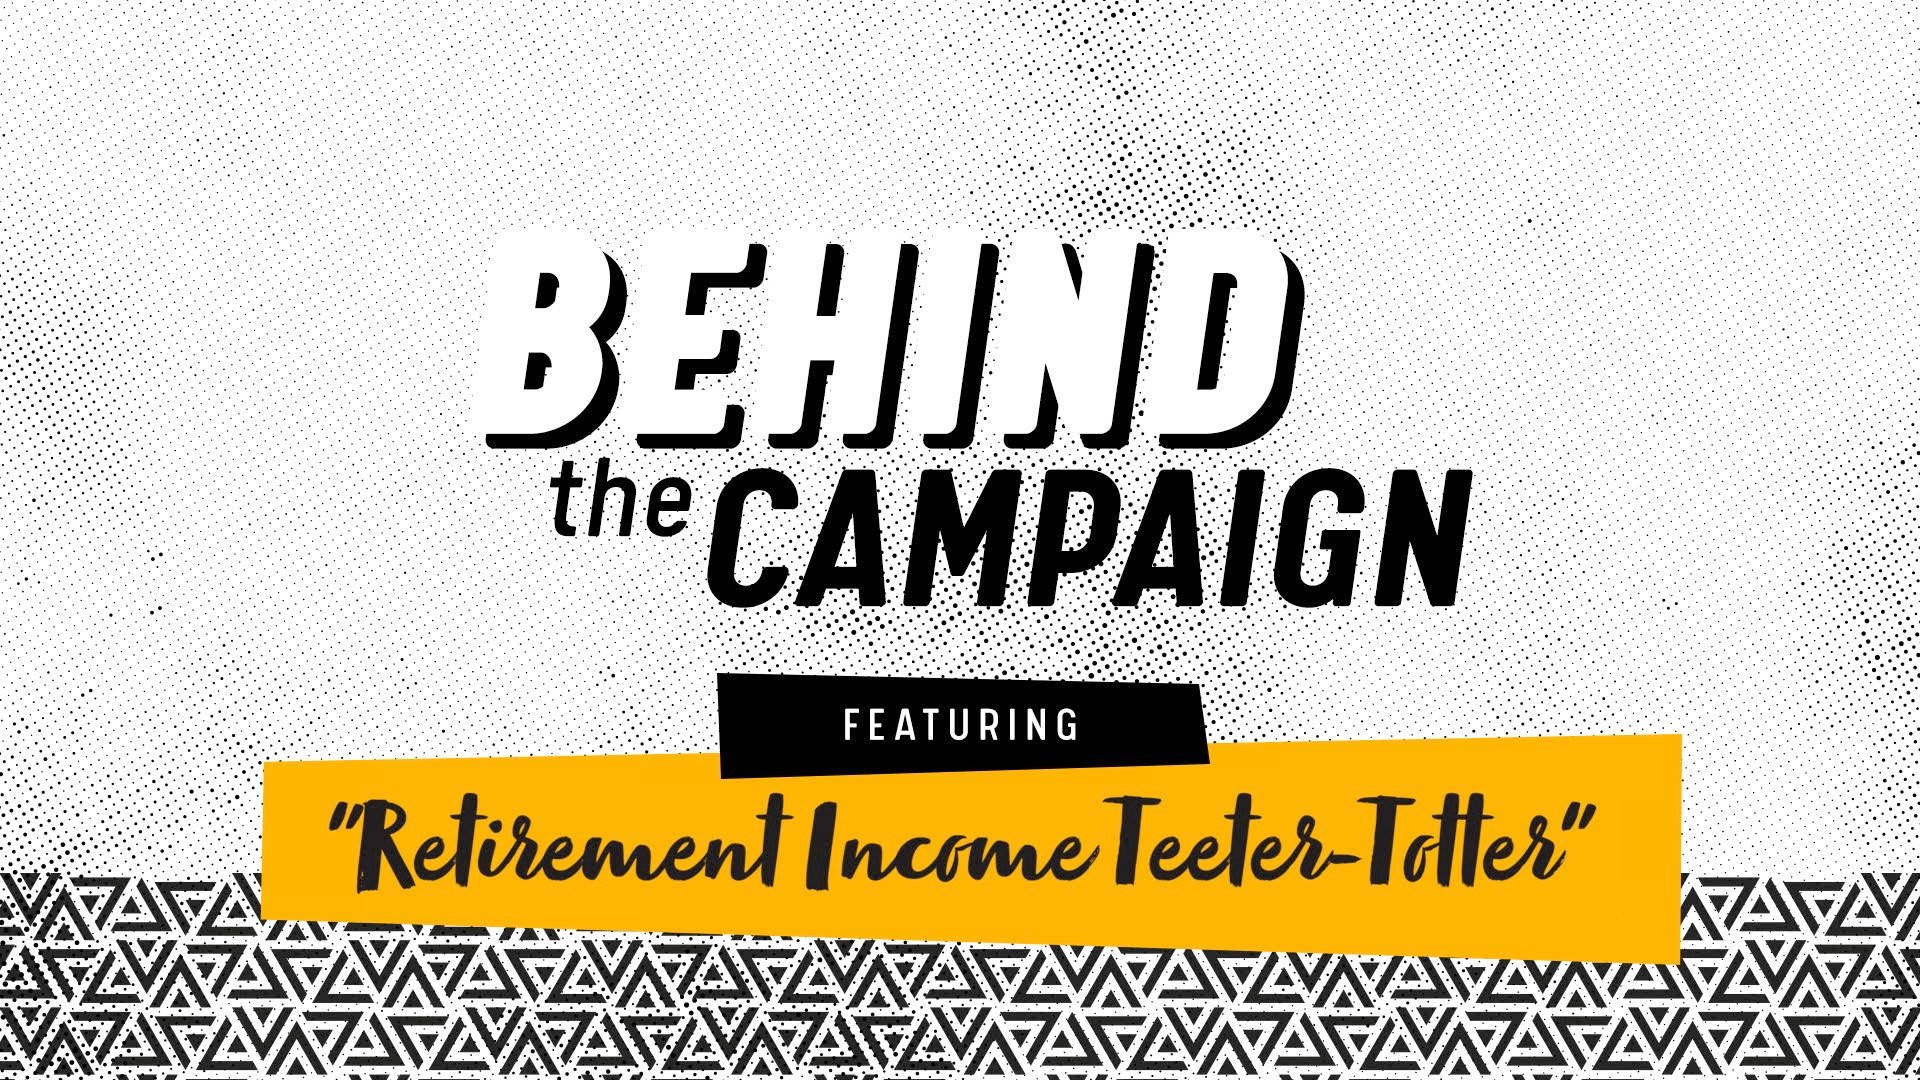 Behind the Campaign: Retirement Income Teeter-Totter